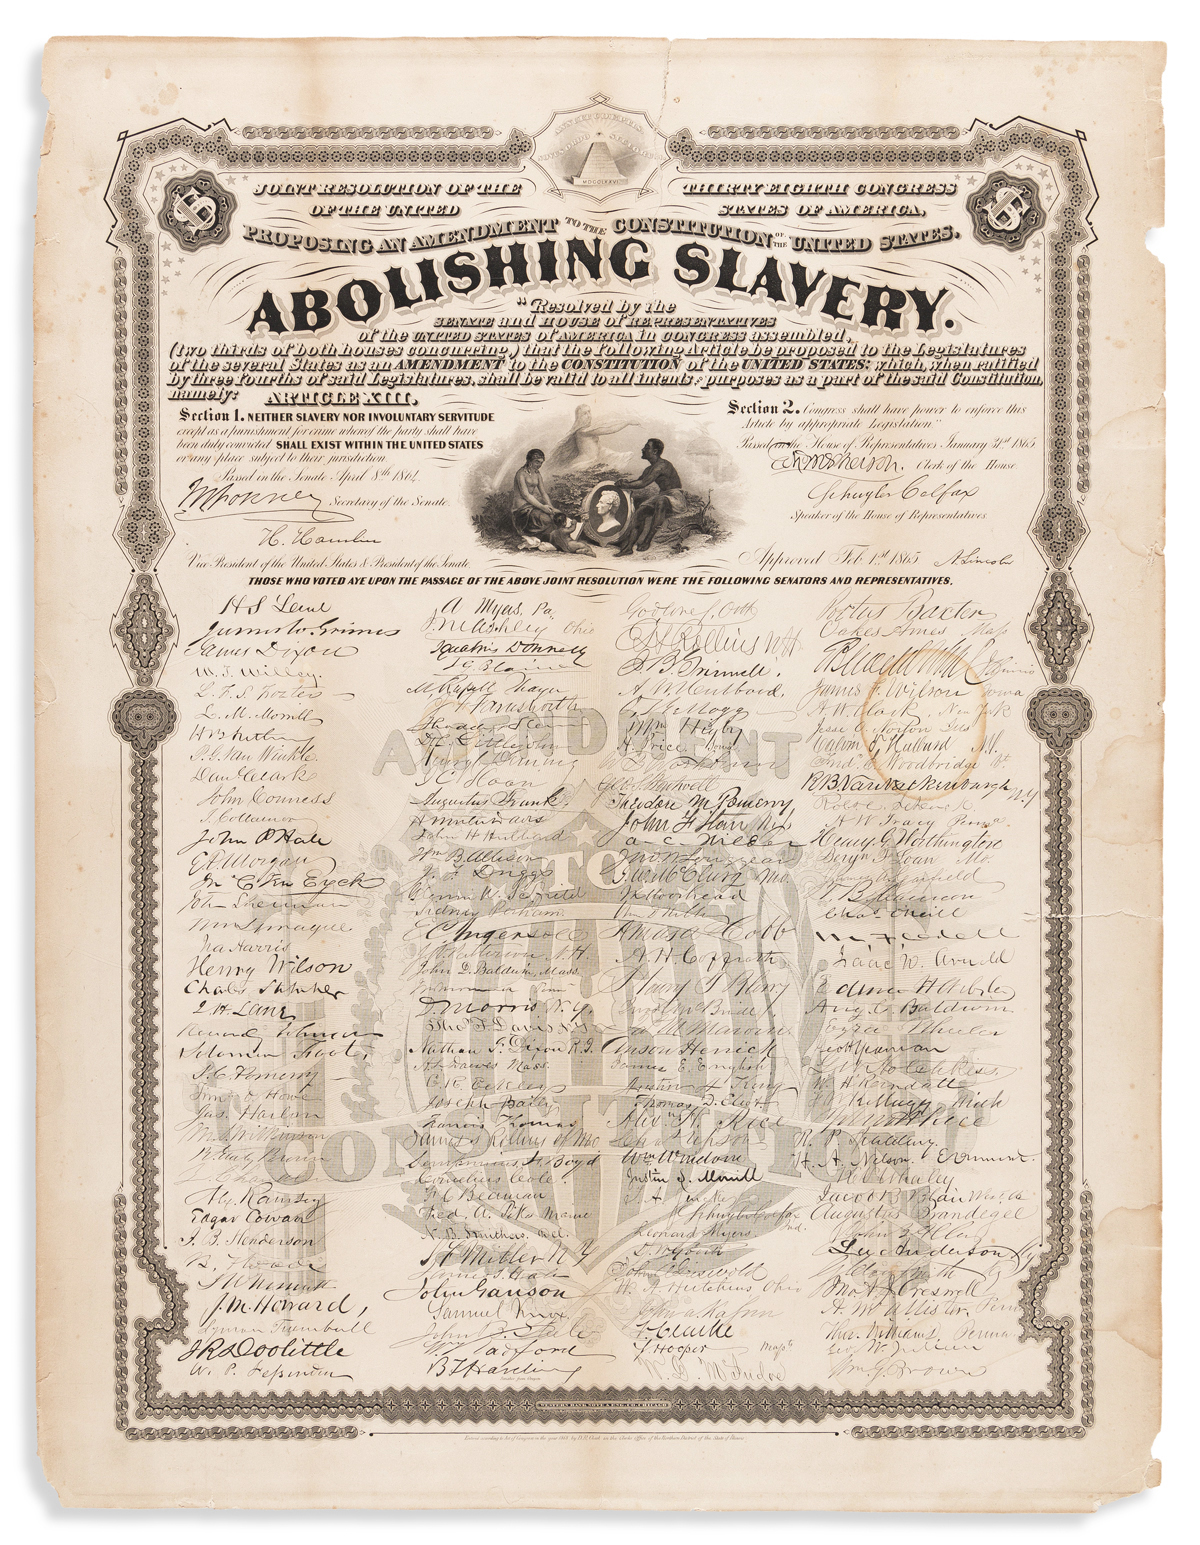 (SLAVERY AND ABOLITION.) Joint Resolution . . . Proposing an Amendment to the Constitution . . . Abolishing Slavery.